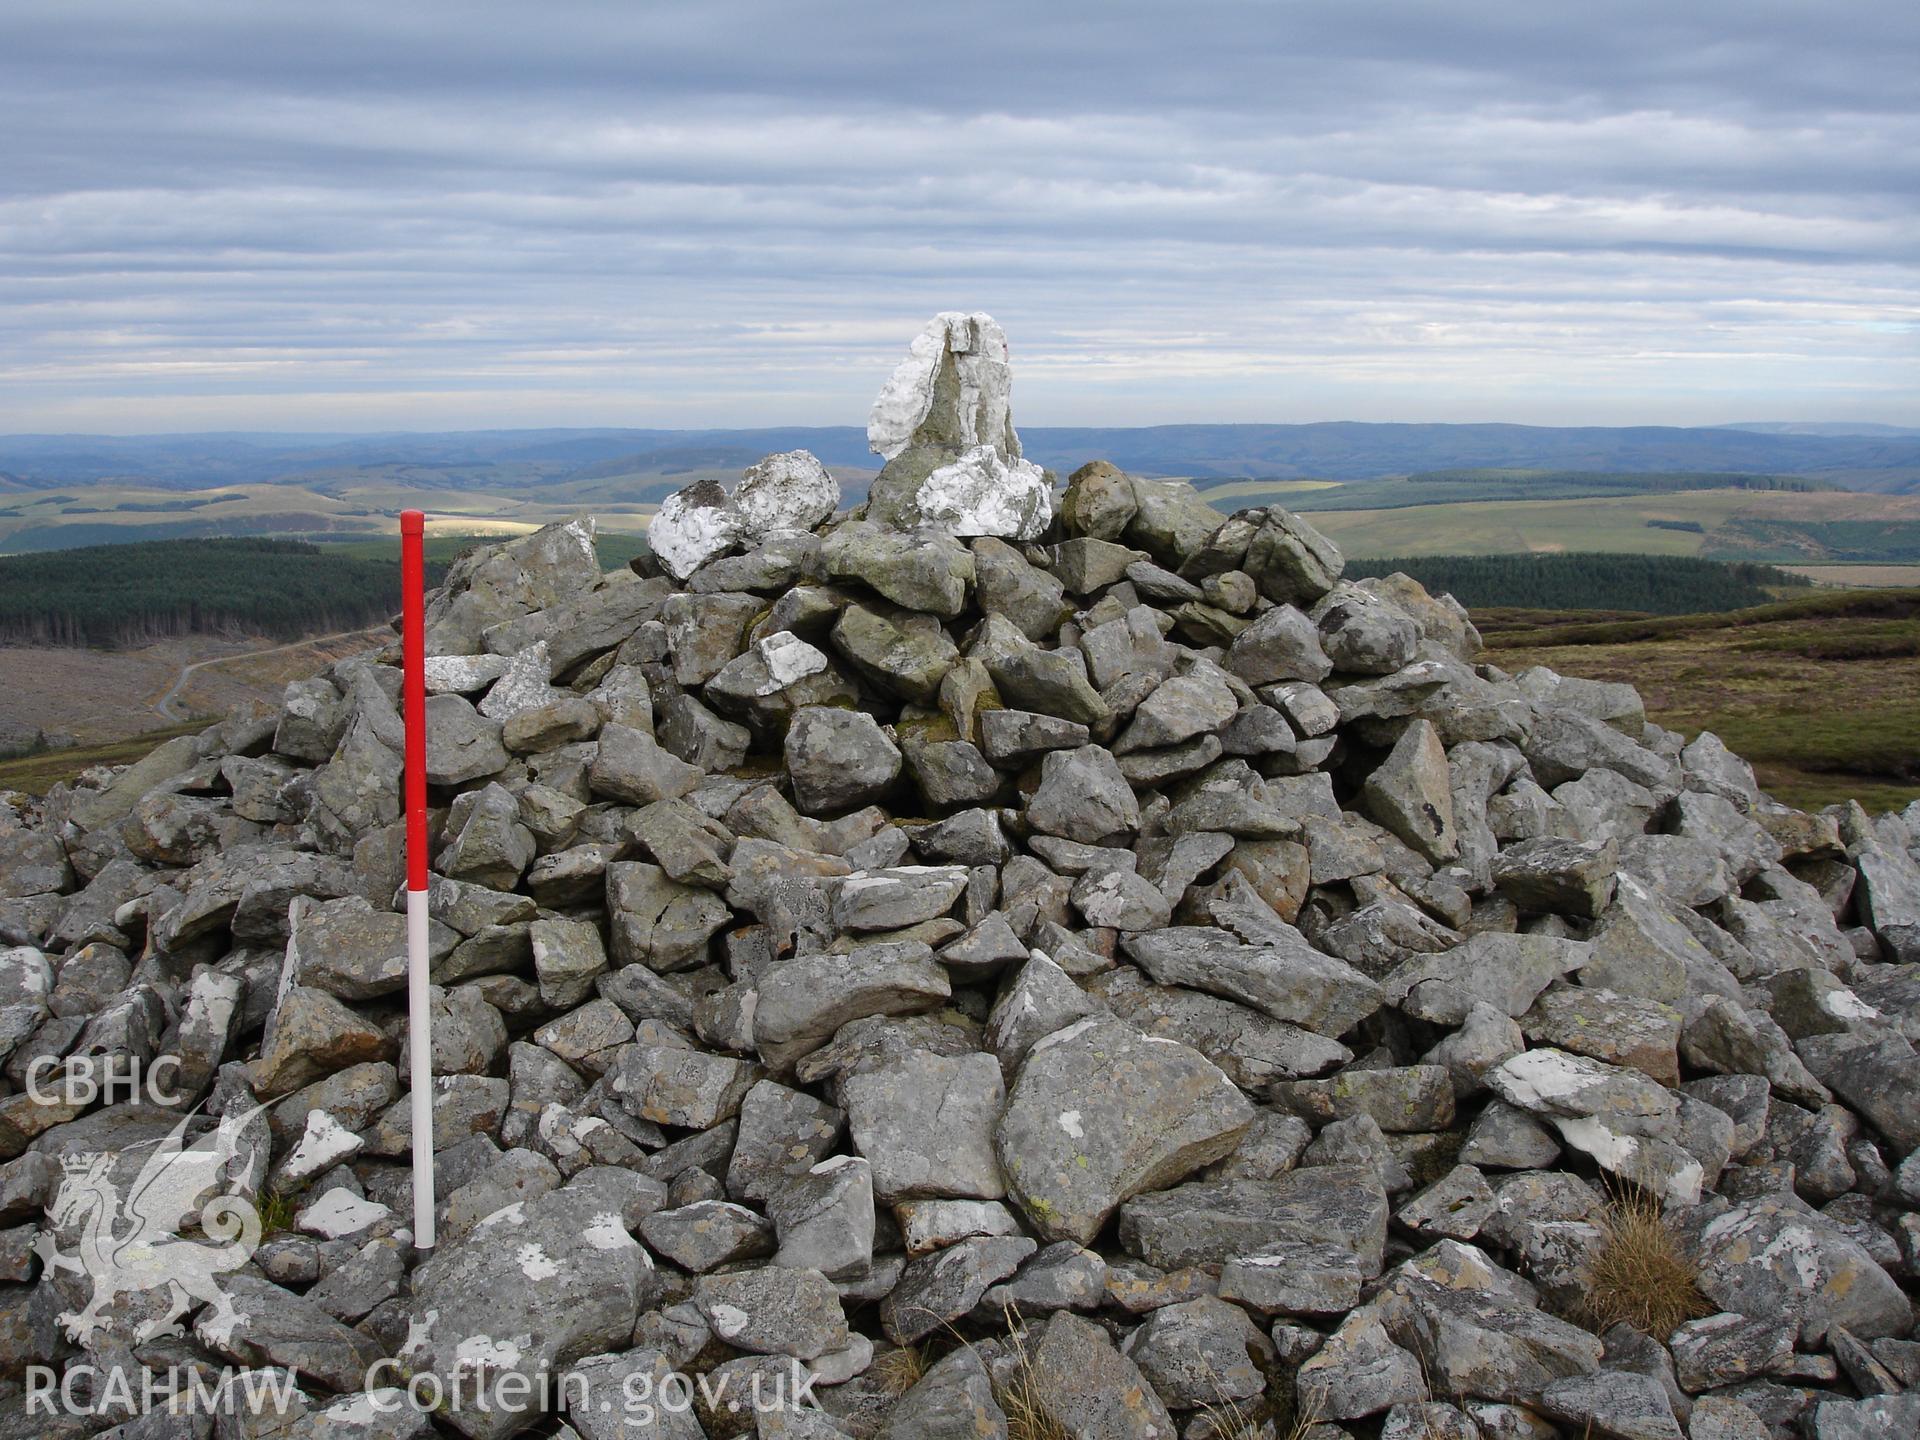 Digital colour photograph of Carn Biga Cairn II taken on 08/08/2006 by R.P. Sambrook during the Plynlimon Glaslyn South Upland survey undertaken by Trysor.